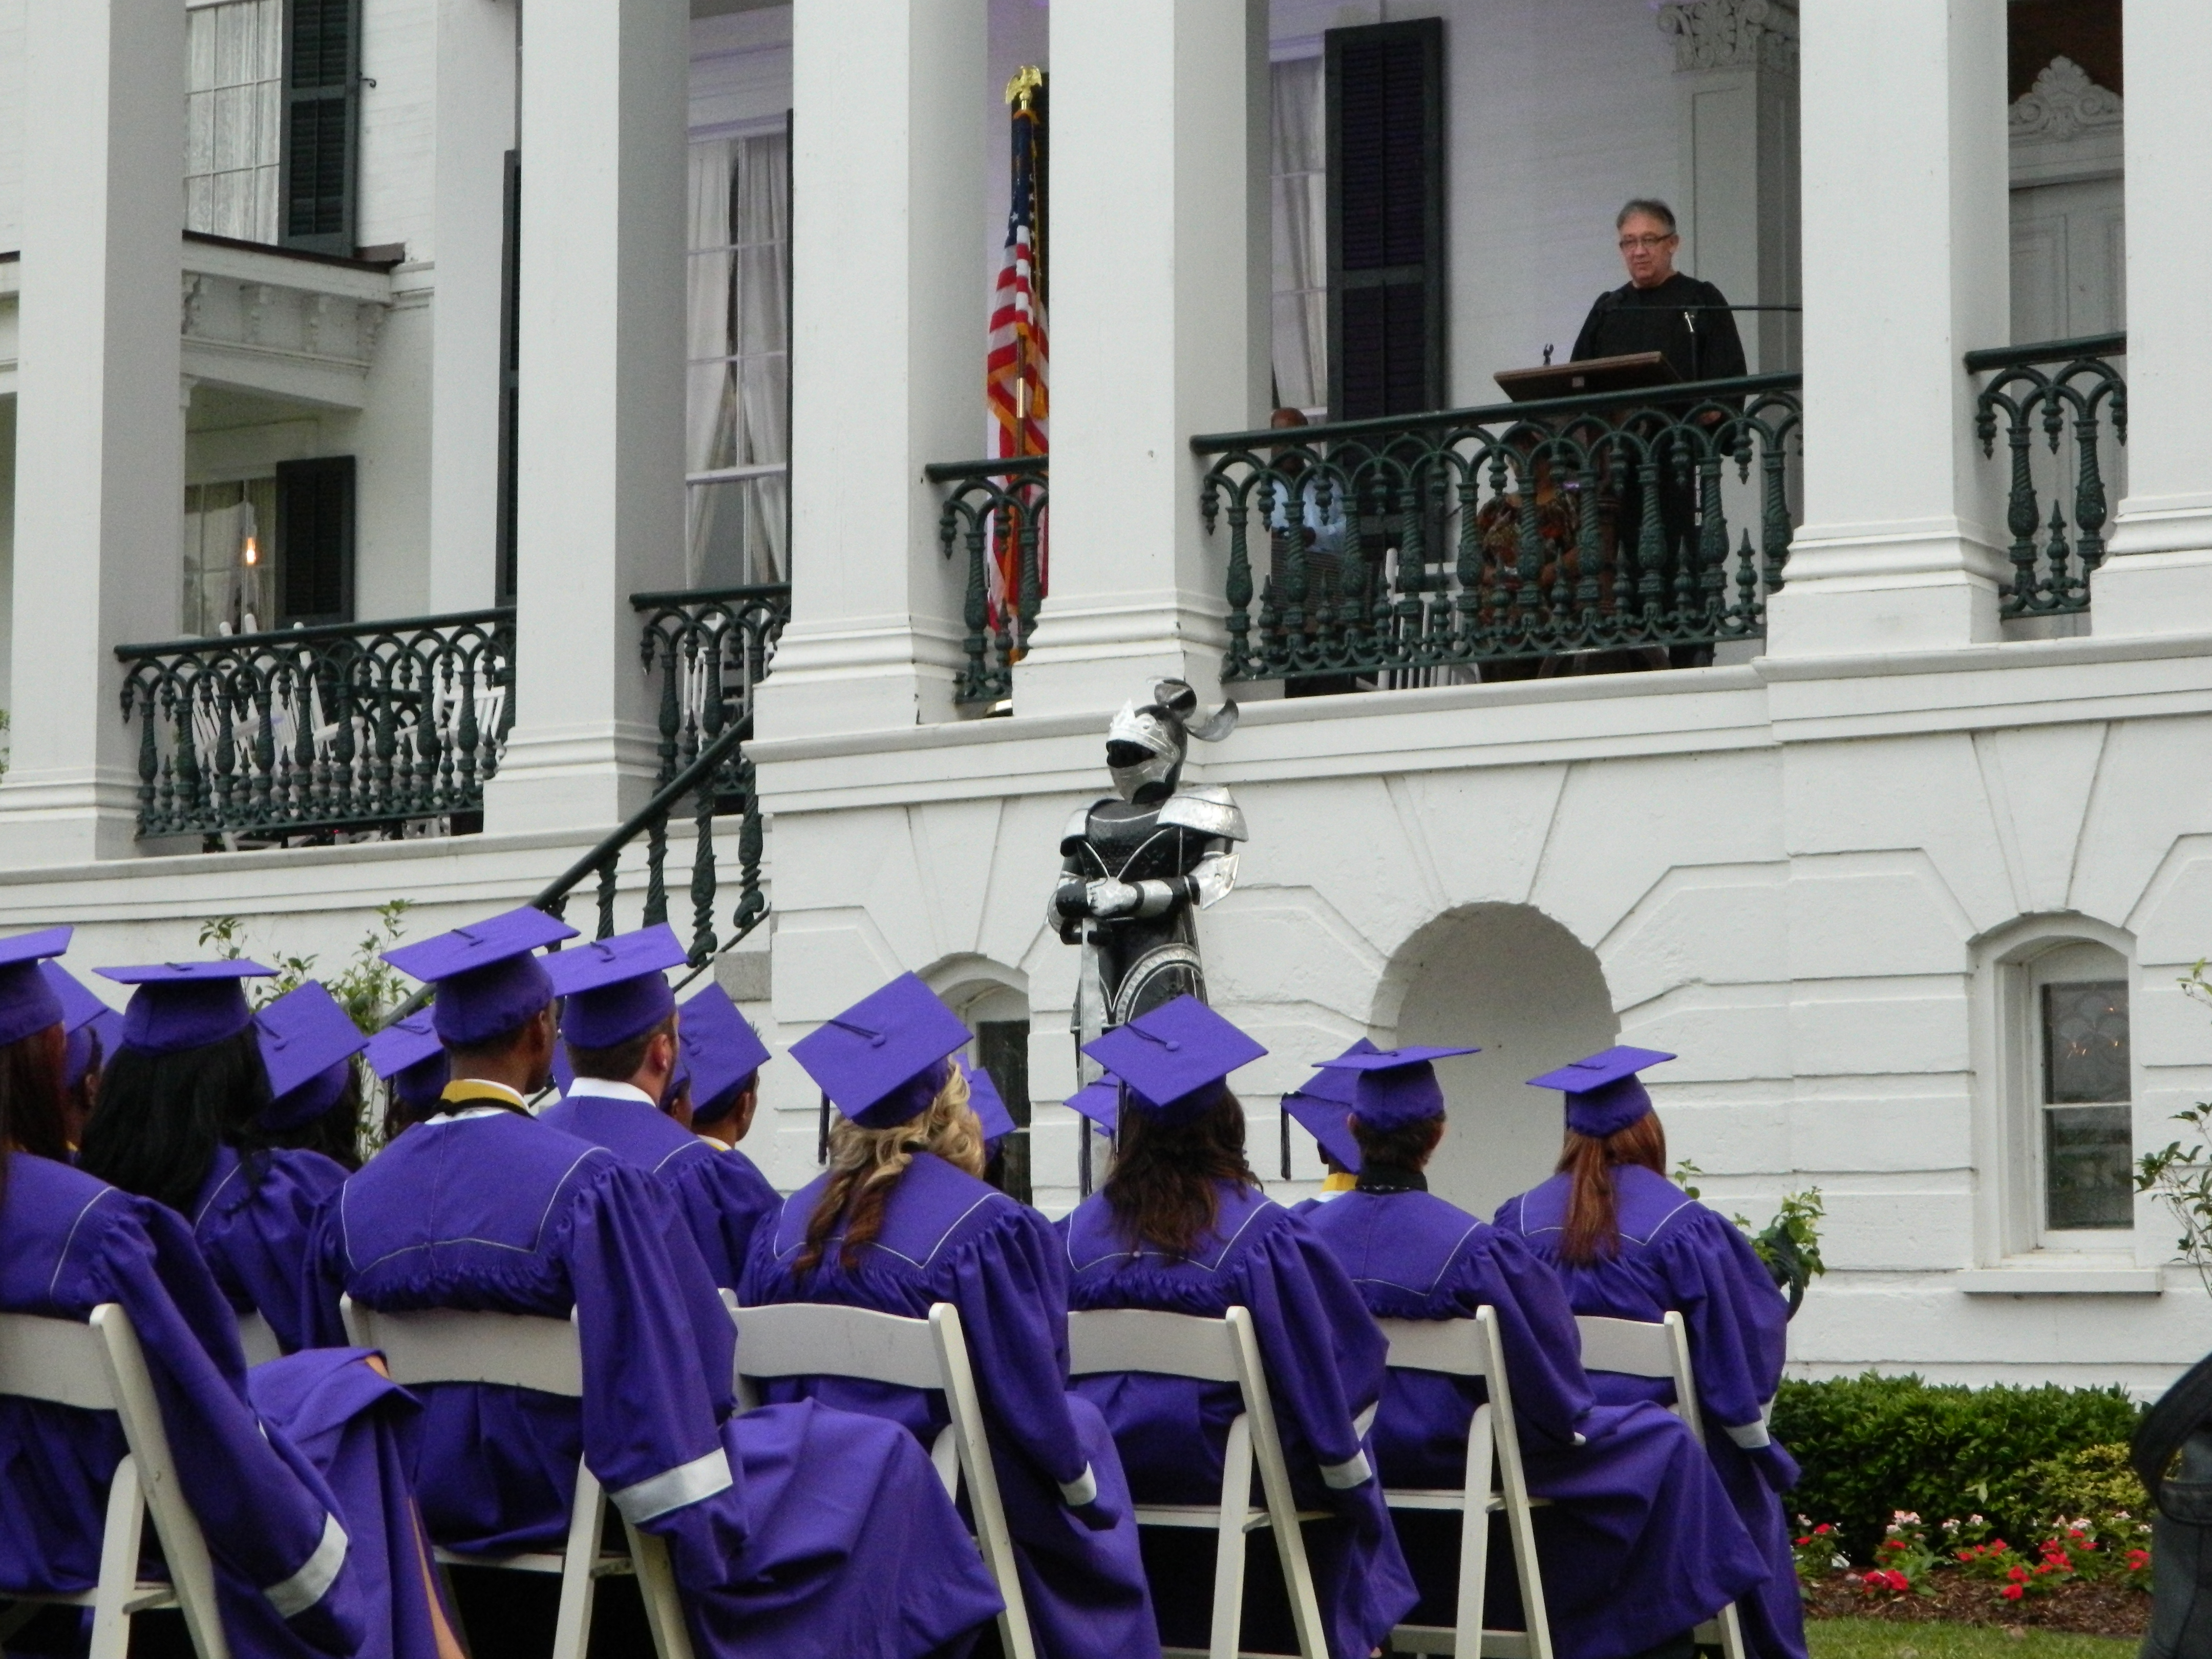 Dennis delivering Commencement Speech at Iberville Math, Science and Arts West High School 2011-2012 Graduation Ceremony at Nottoway Plantation, Plaquemine, Louisiana.